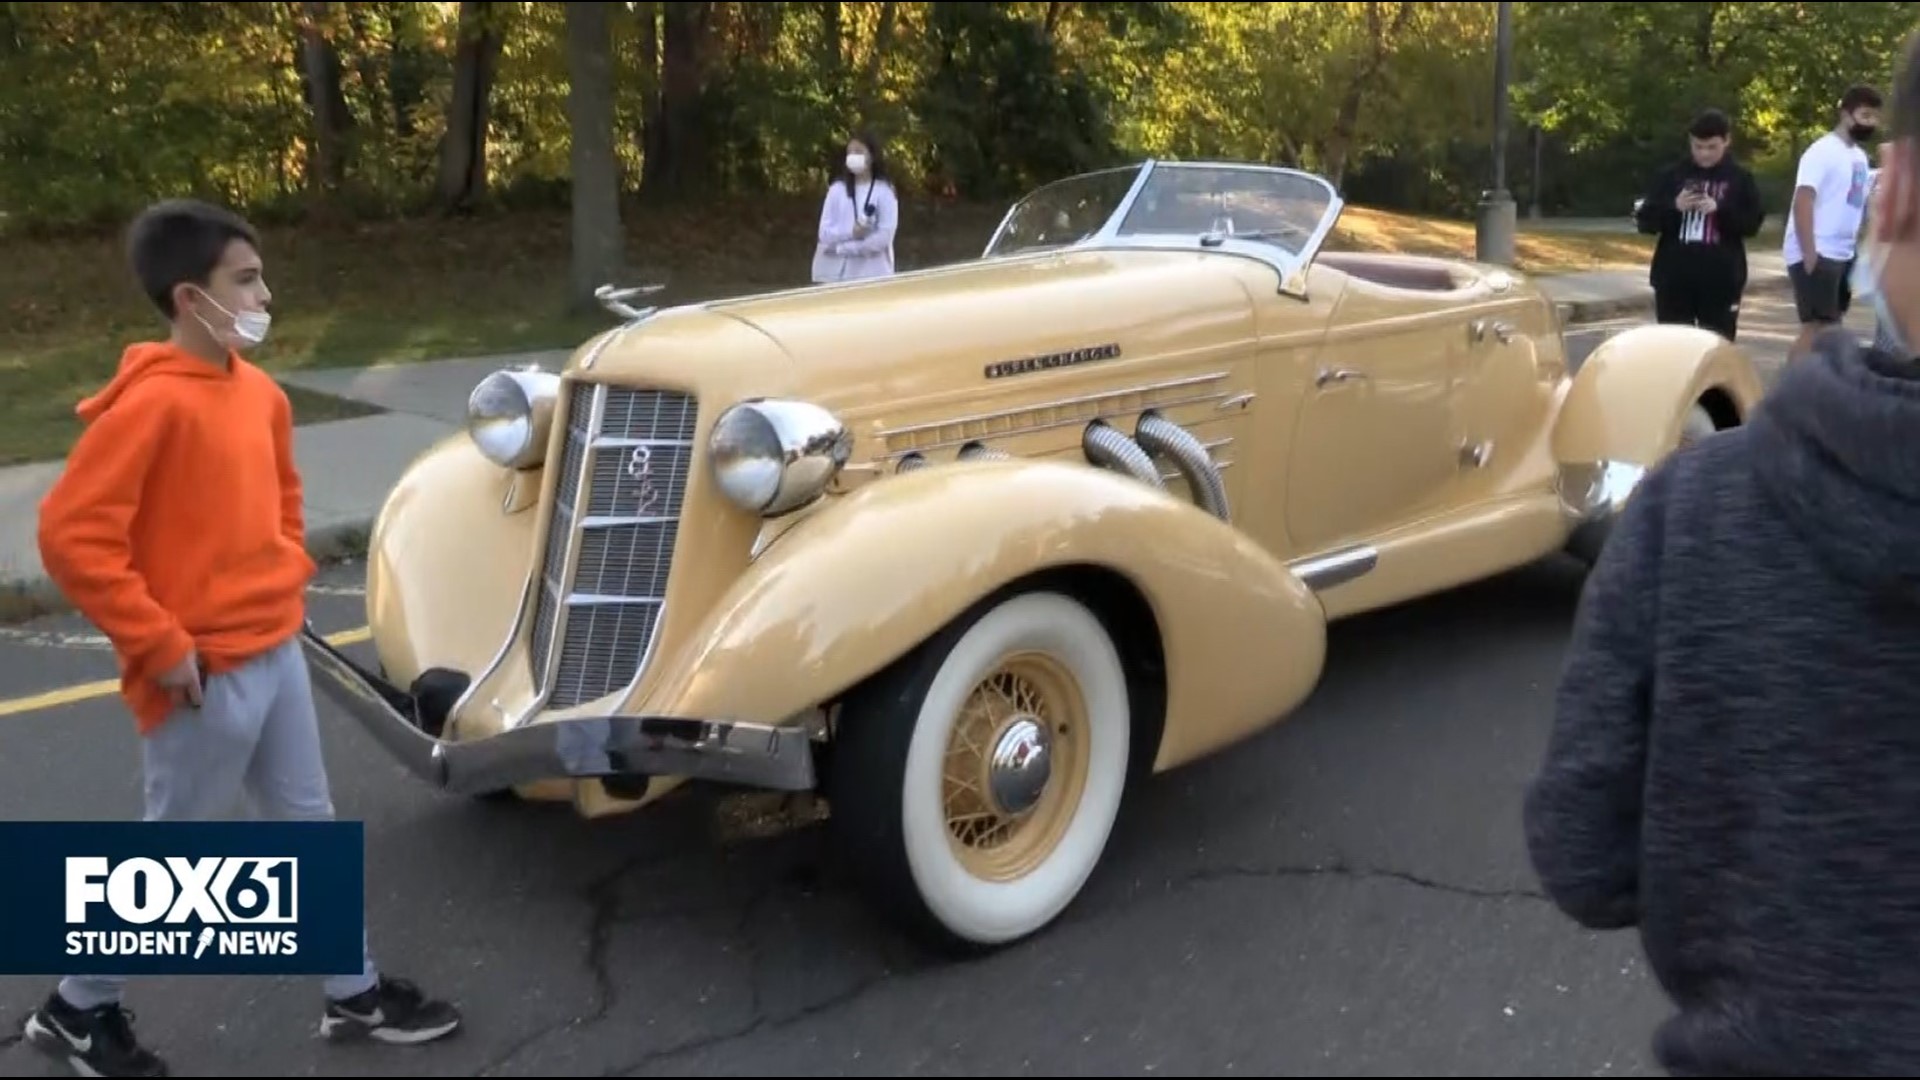 The club was recently treated to a look at a Super charged 1934 Auburn Boat Tail Speedster